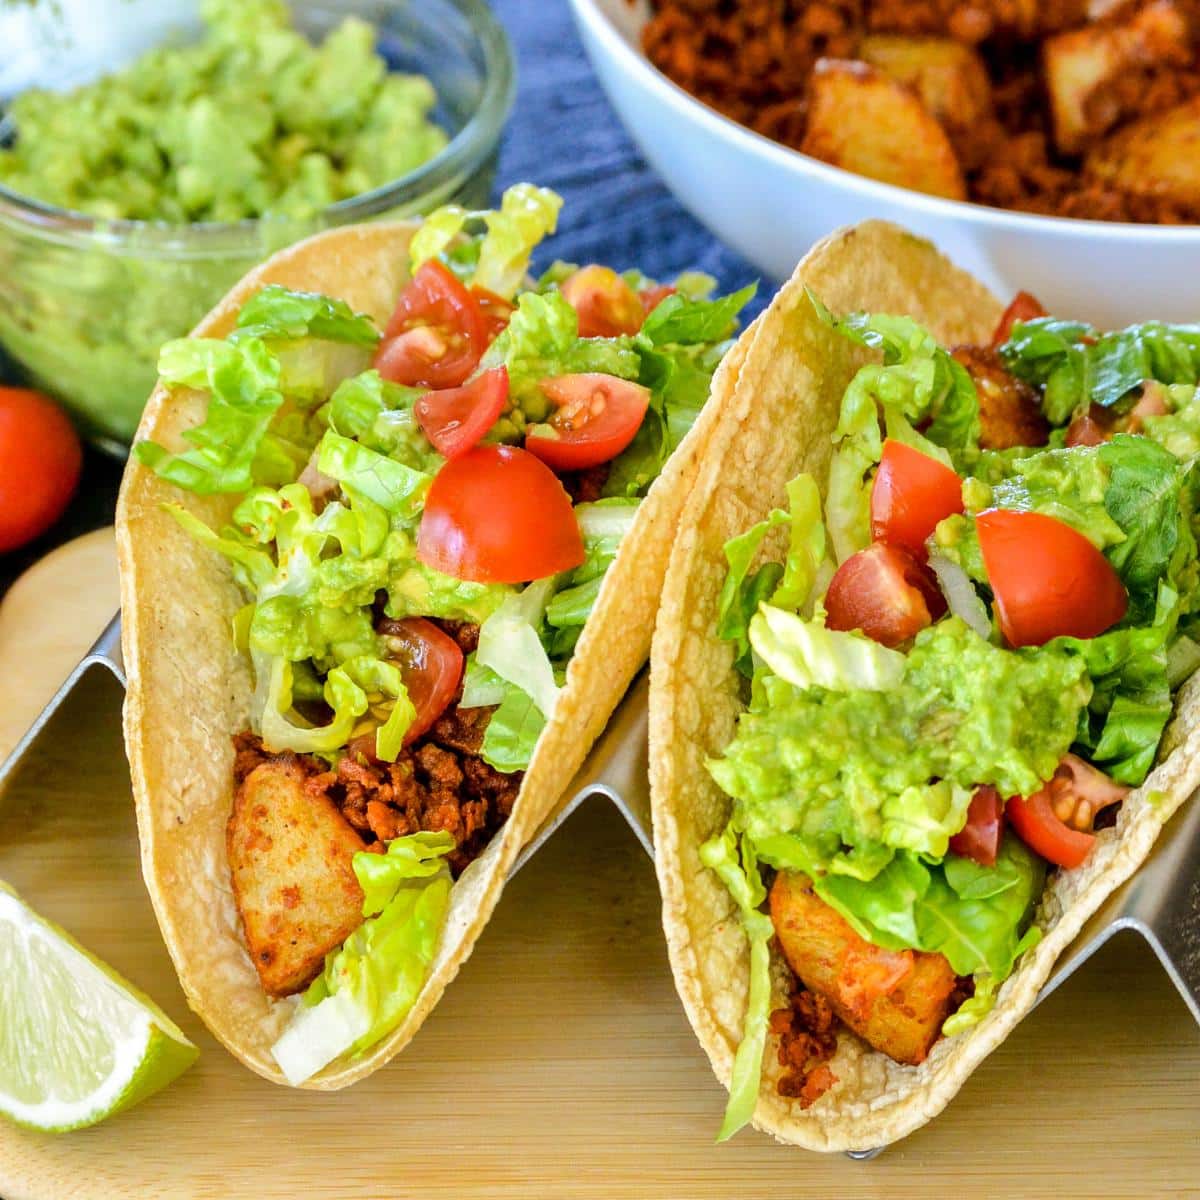 Tacos topped with guacamole, lettuce, and tomatoes.